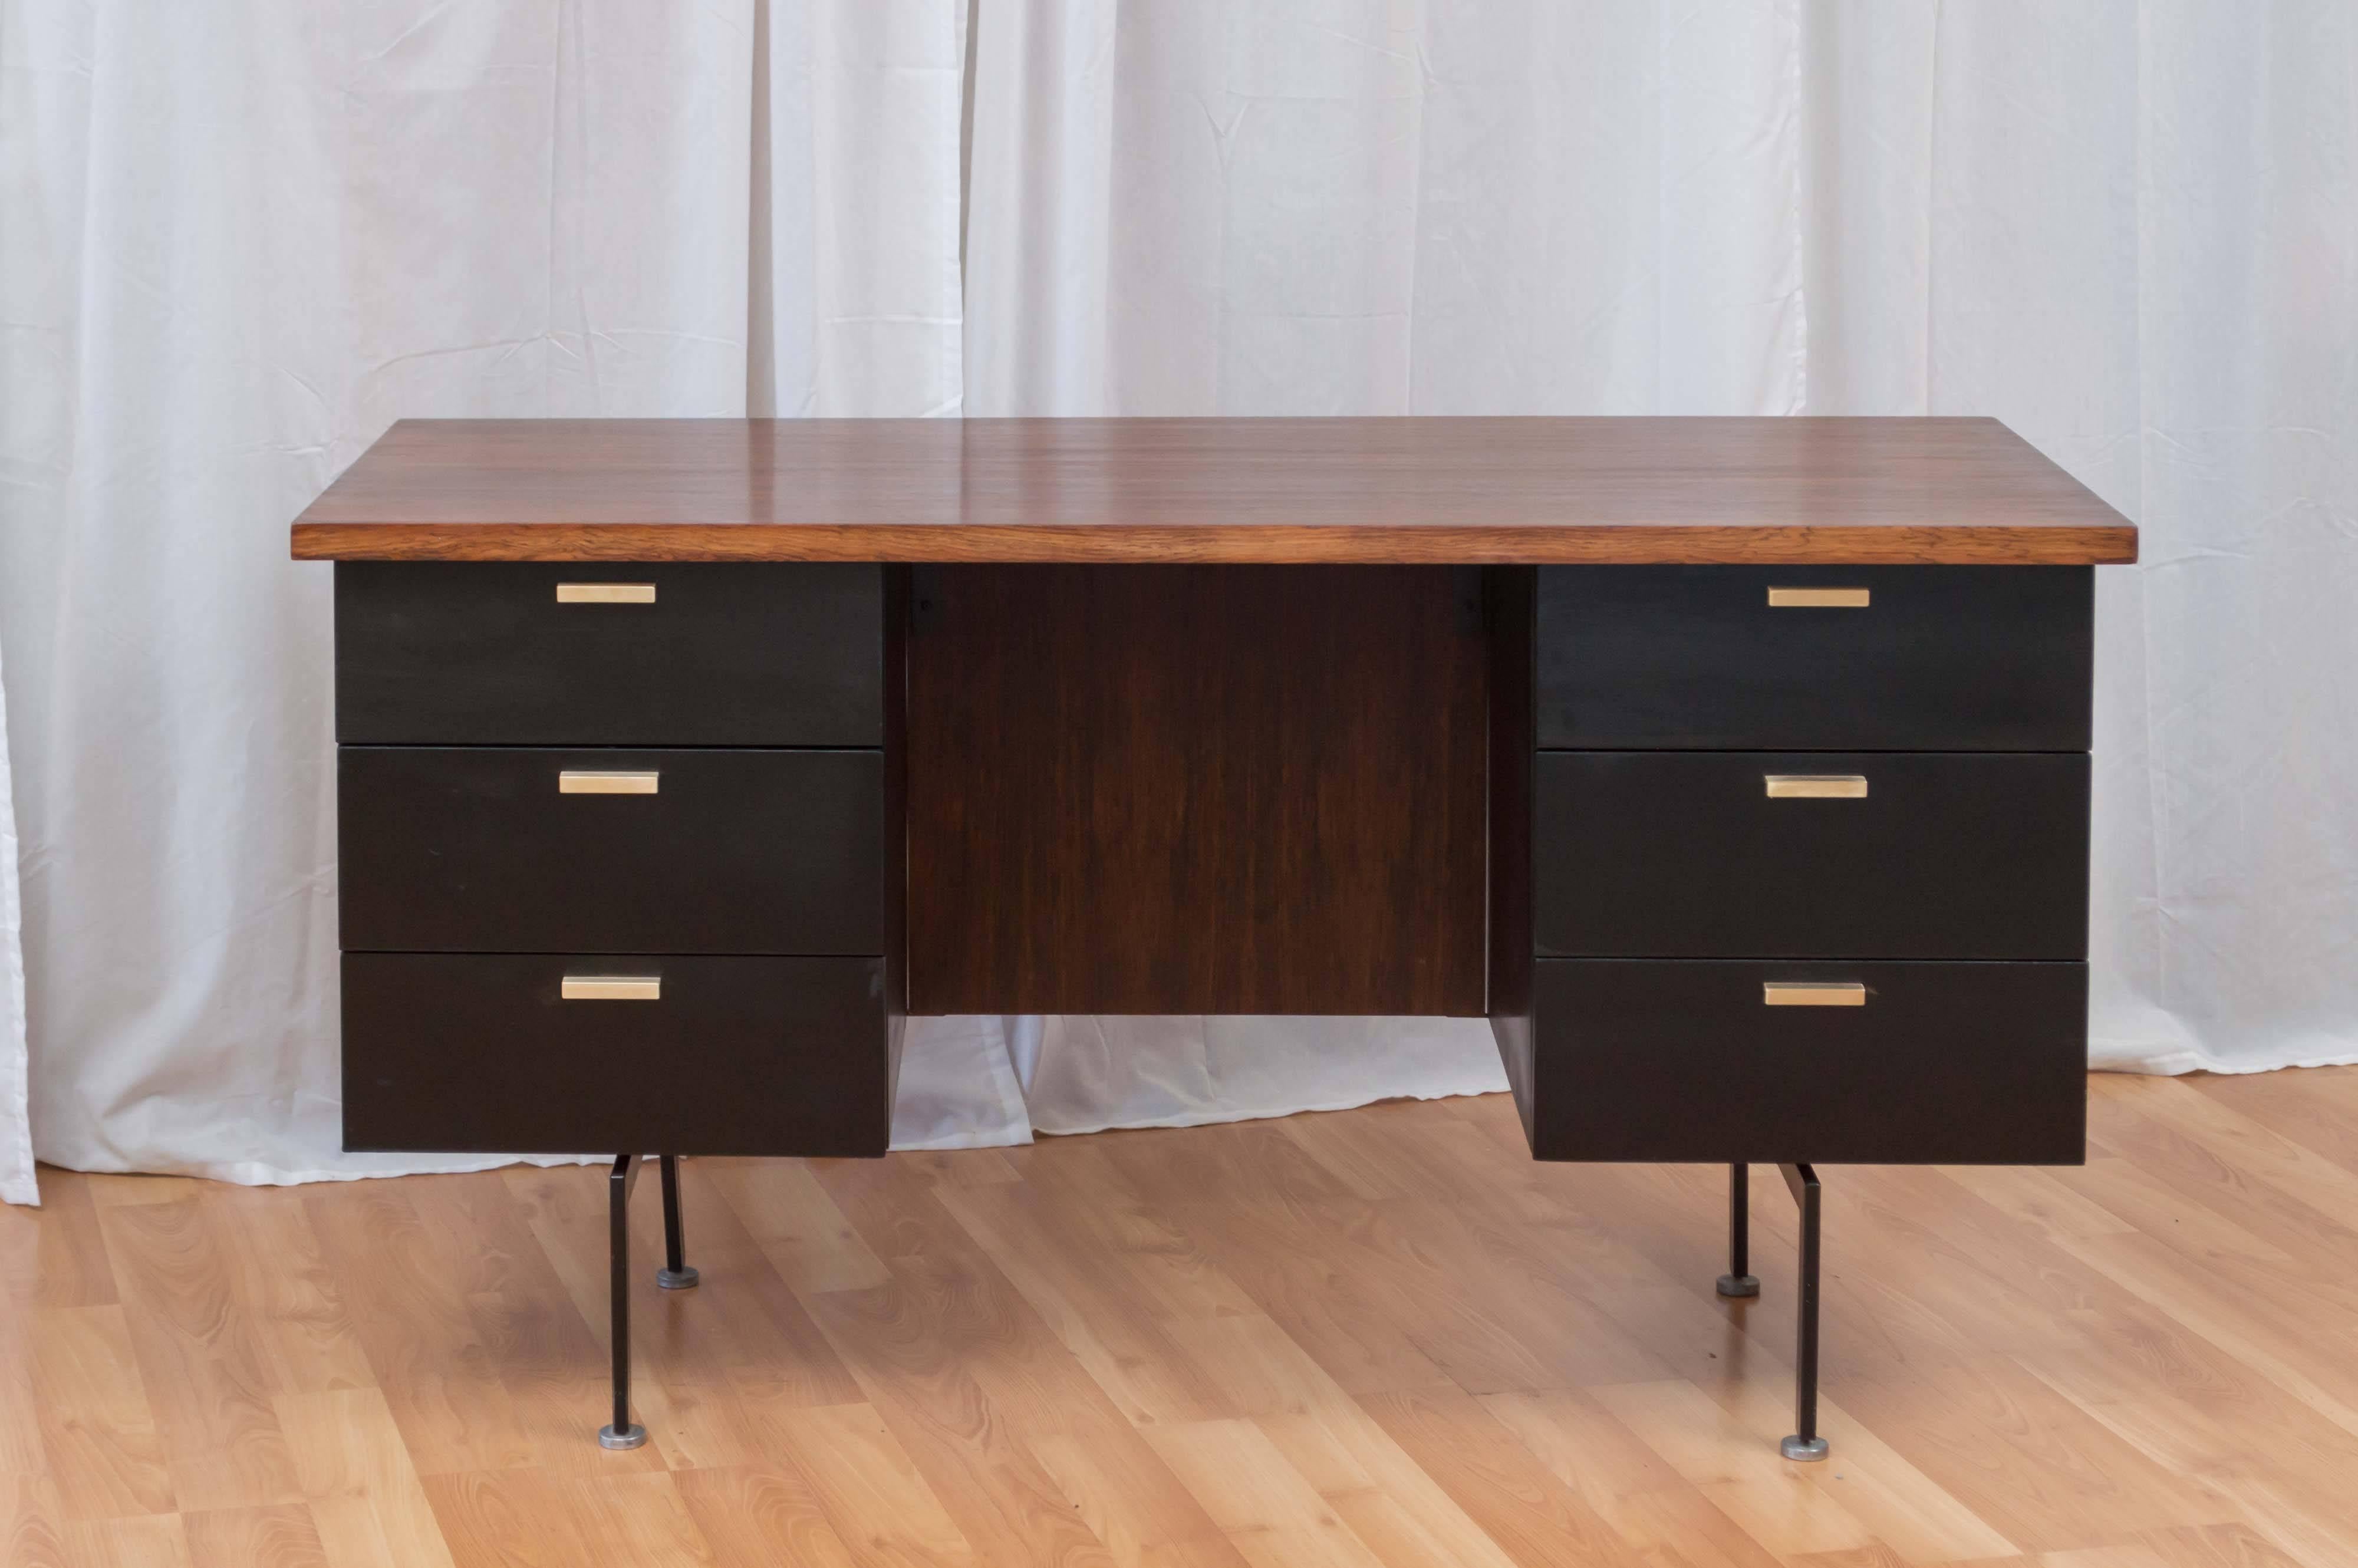 A handsome and rare six-drawer rosewood executive desk by Robert John Furniture in the style of George Nelson.

Thick and expansive top is finished in lively, bookmatched rosewood veneer, as is the modesty panel. Cabinets and drawers are black